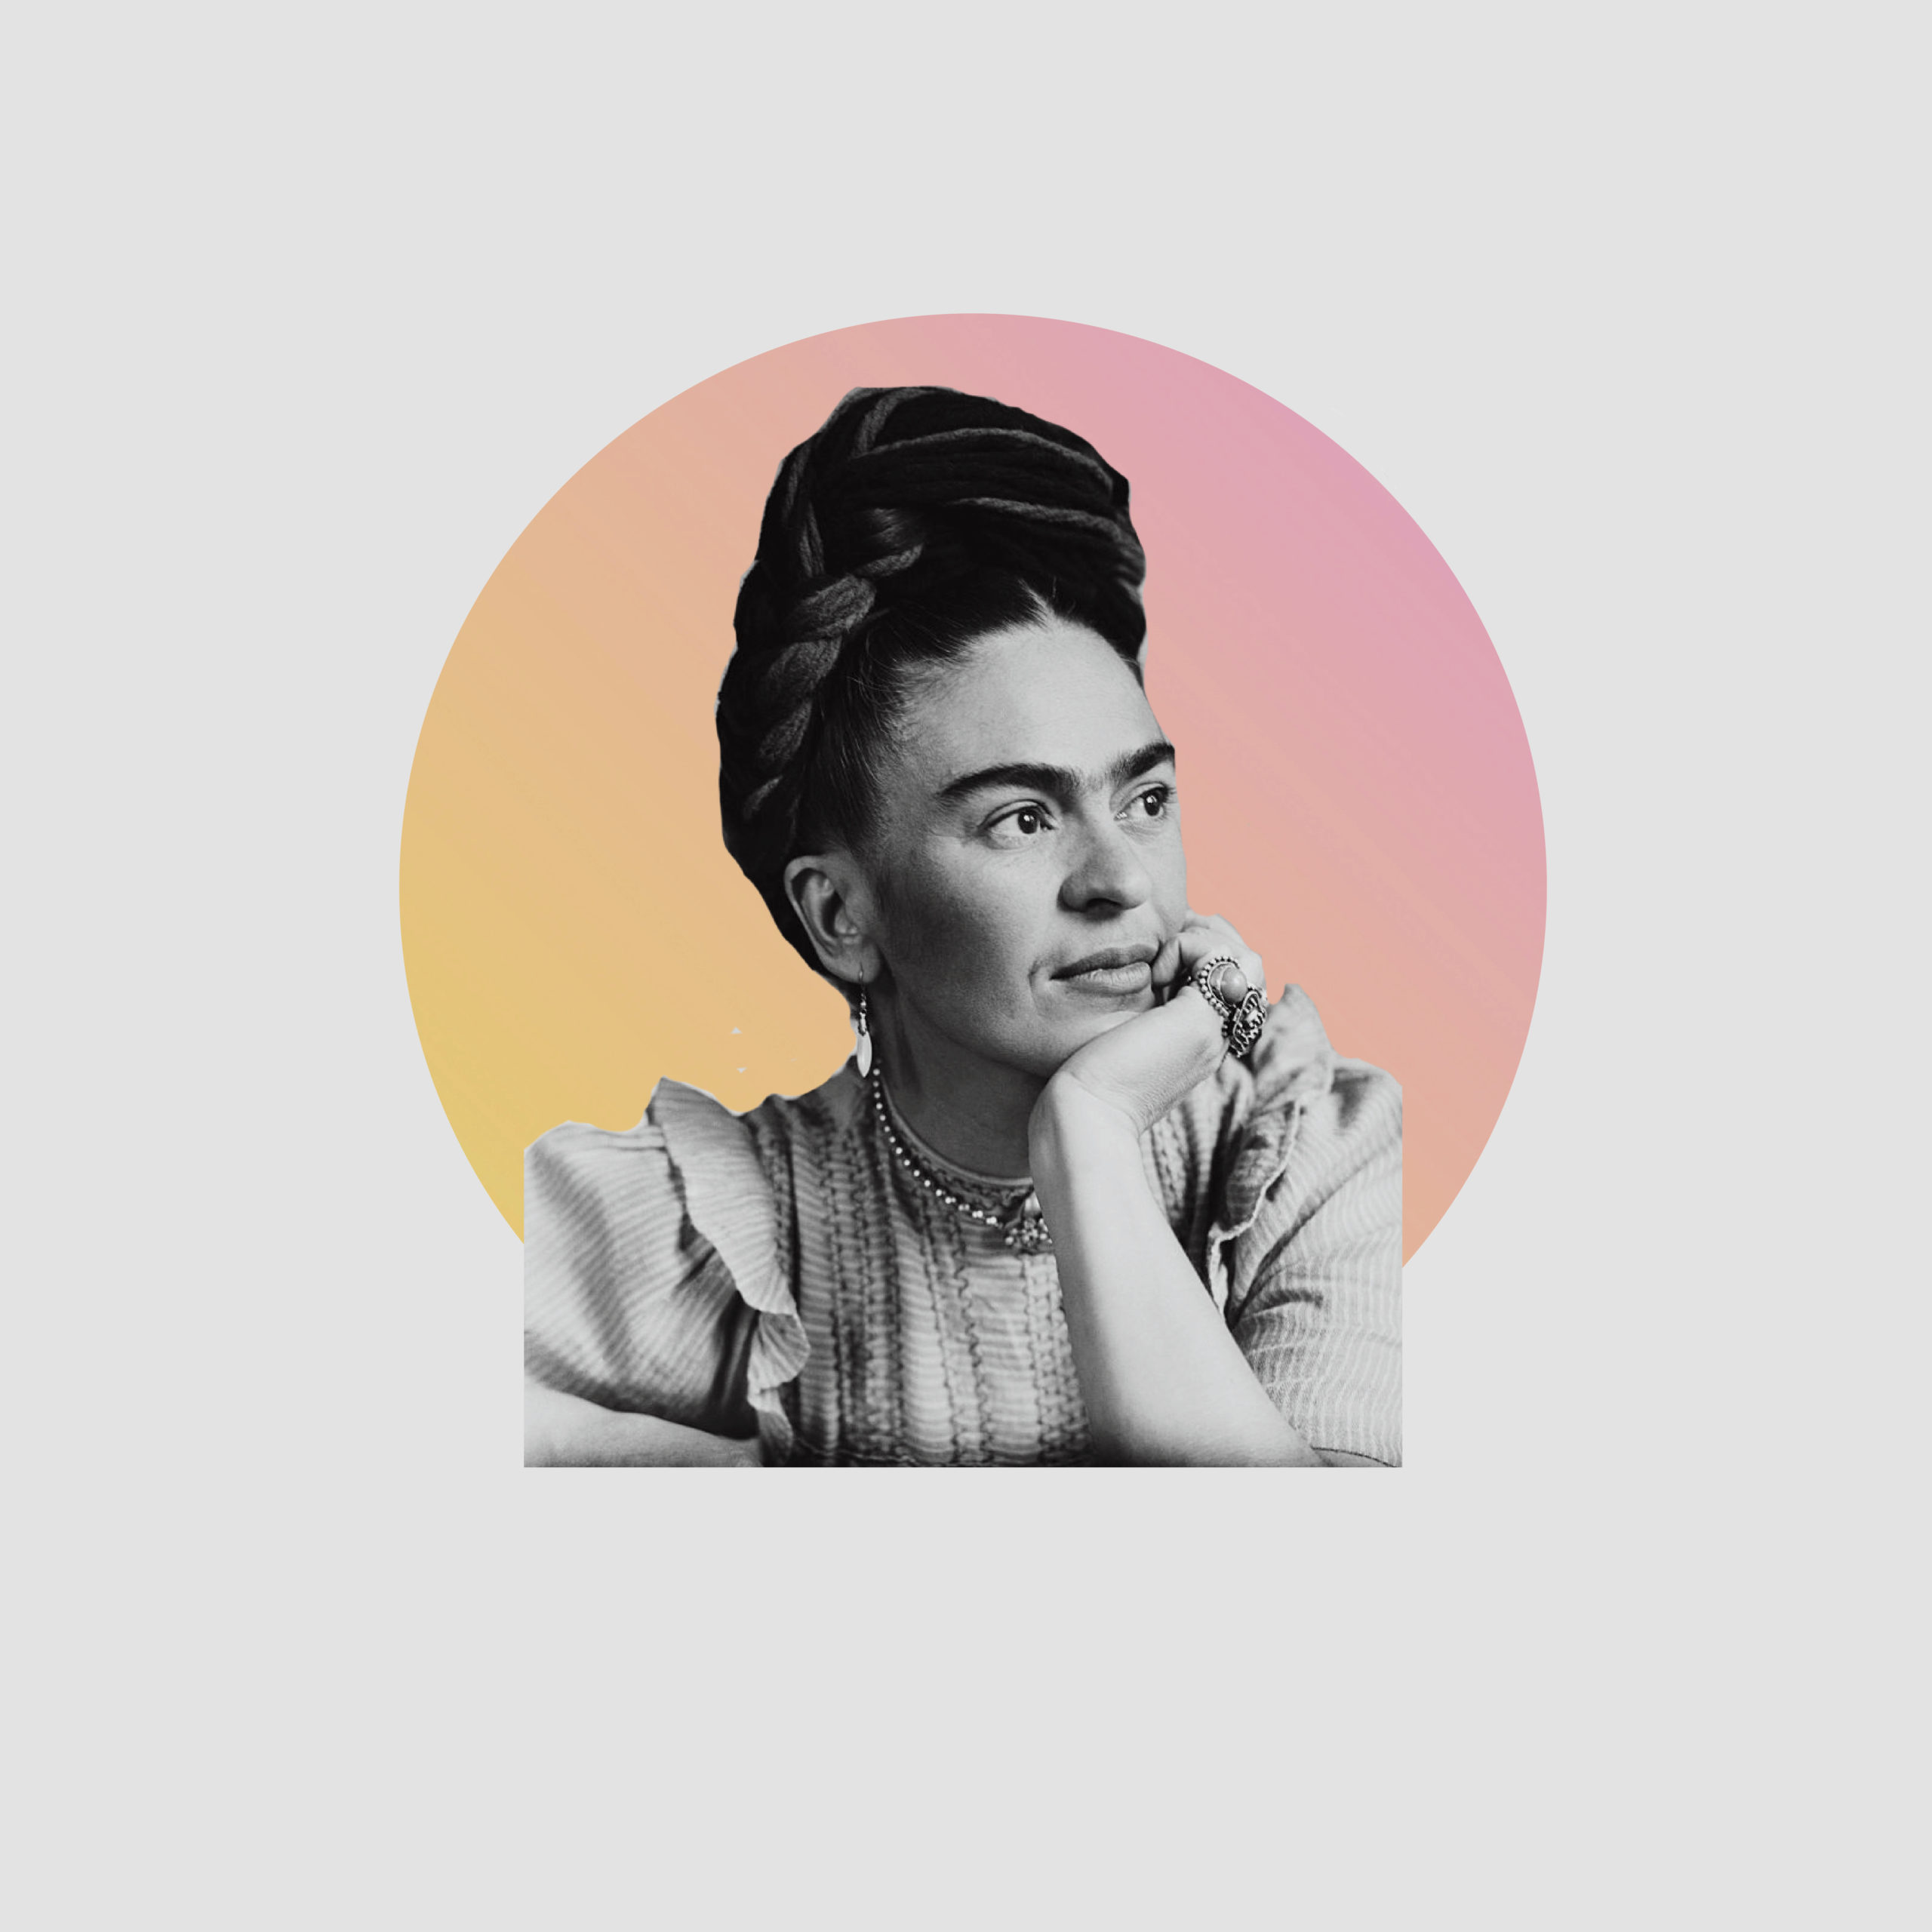 Picture of Frida Kahlo on a gray background.